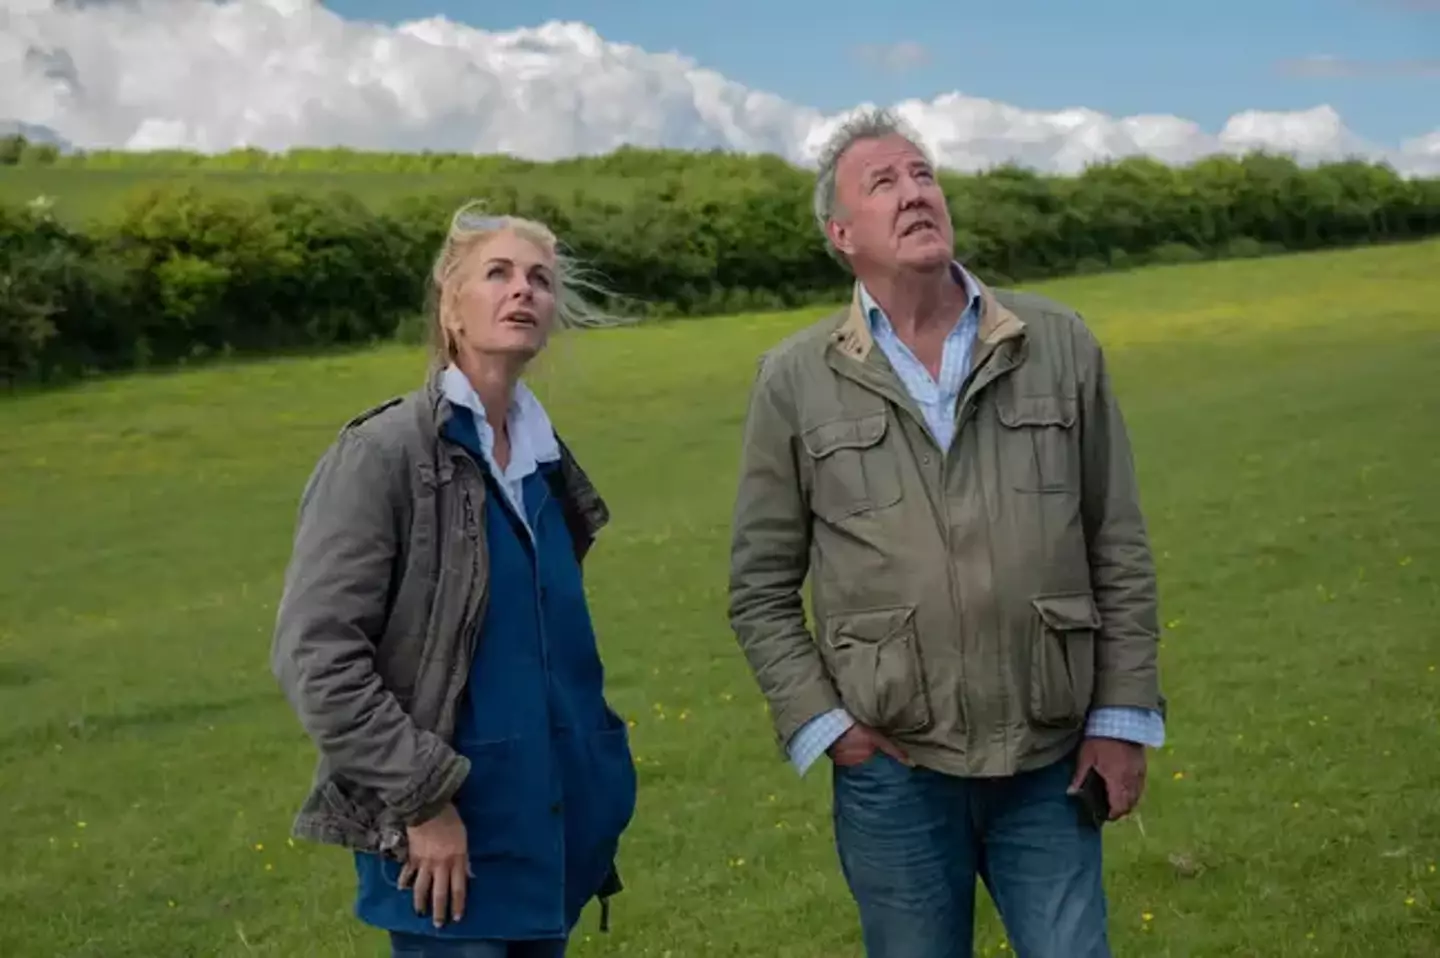 Life doesn't get much easier on the farm for Clarkson and co in season two.